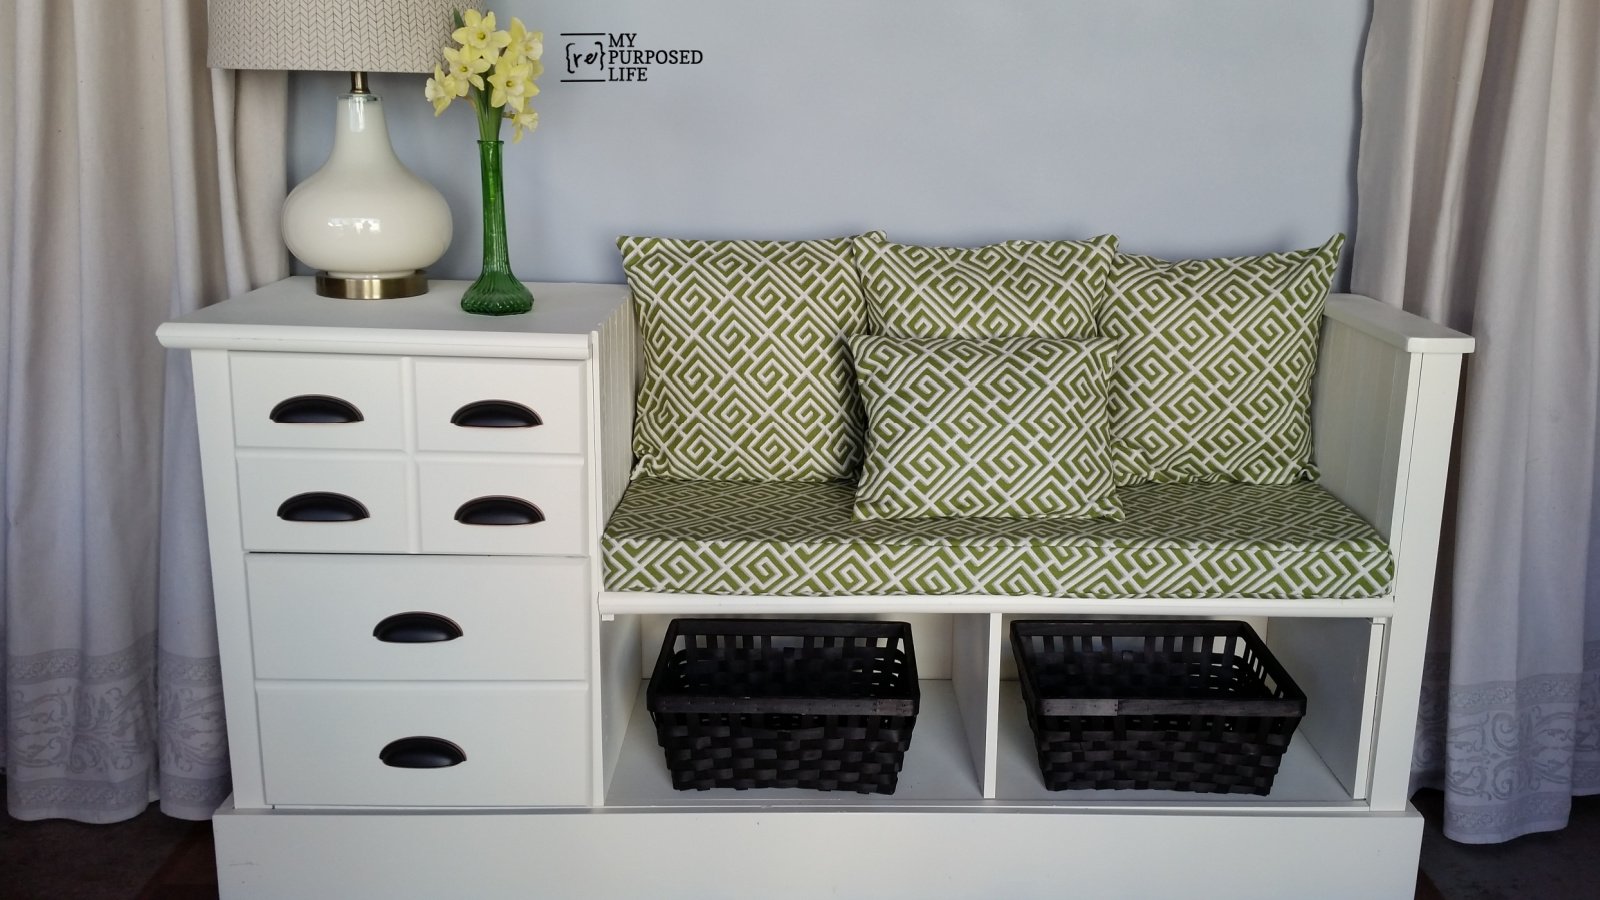 How to Repurpose an Old Trunk: 10 Creative Ideas